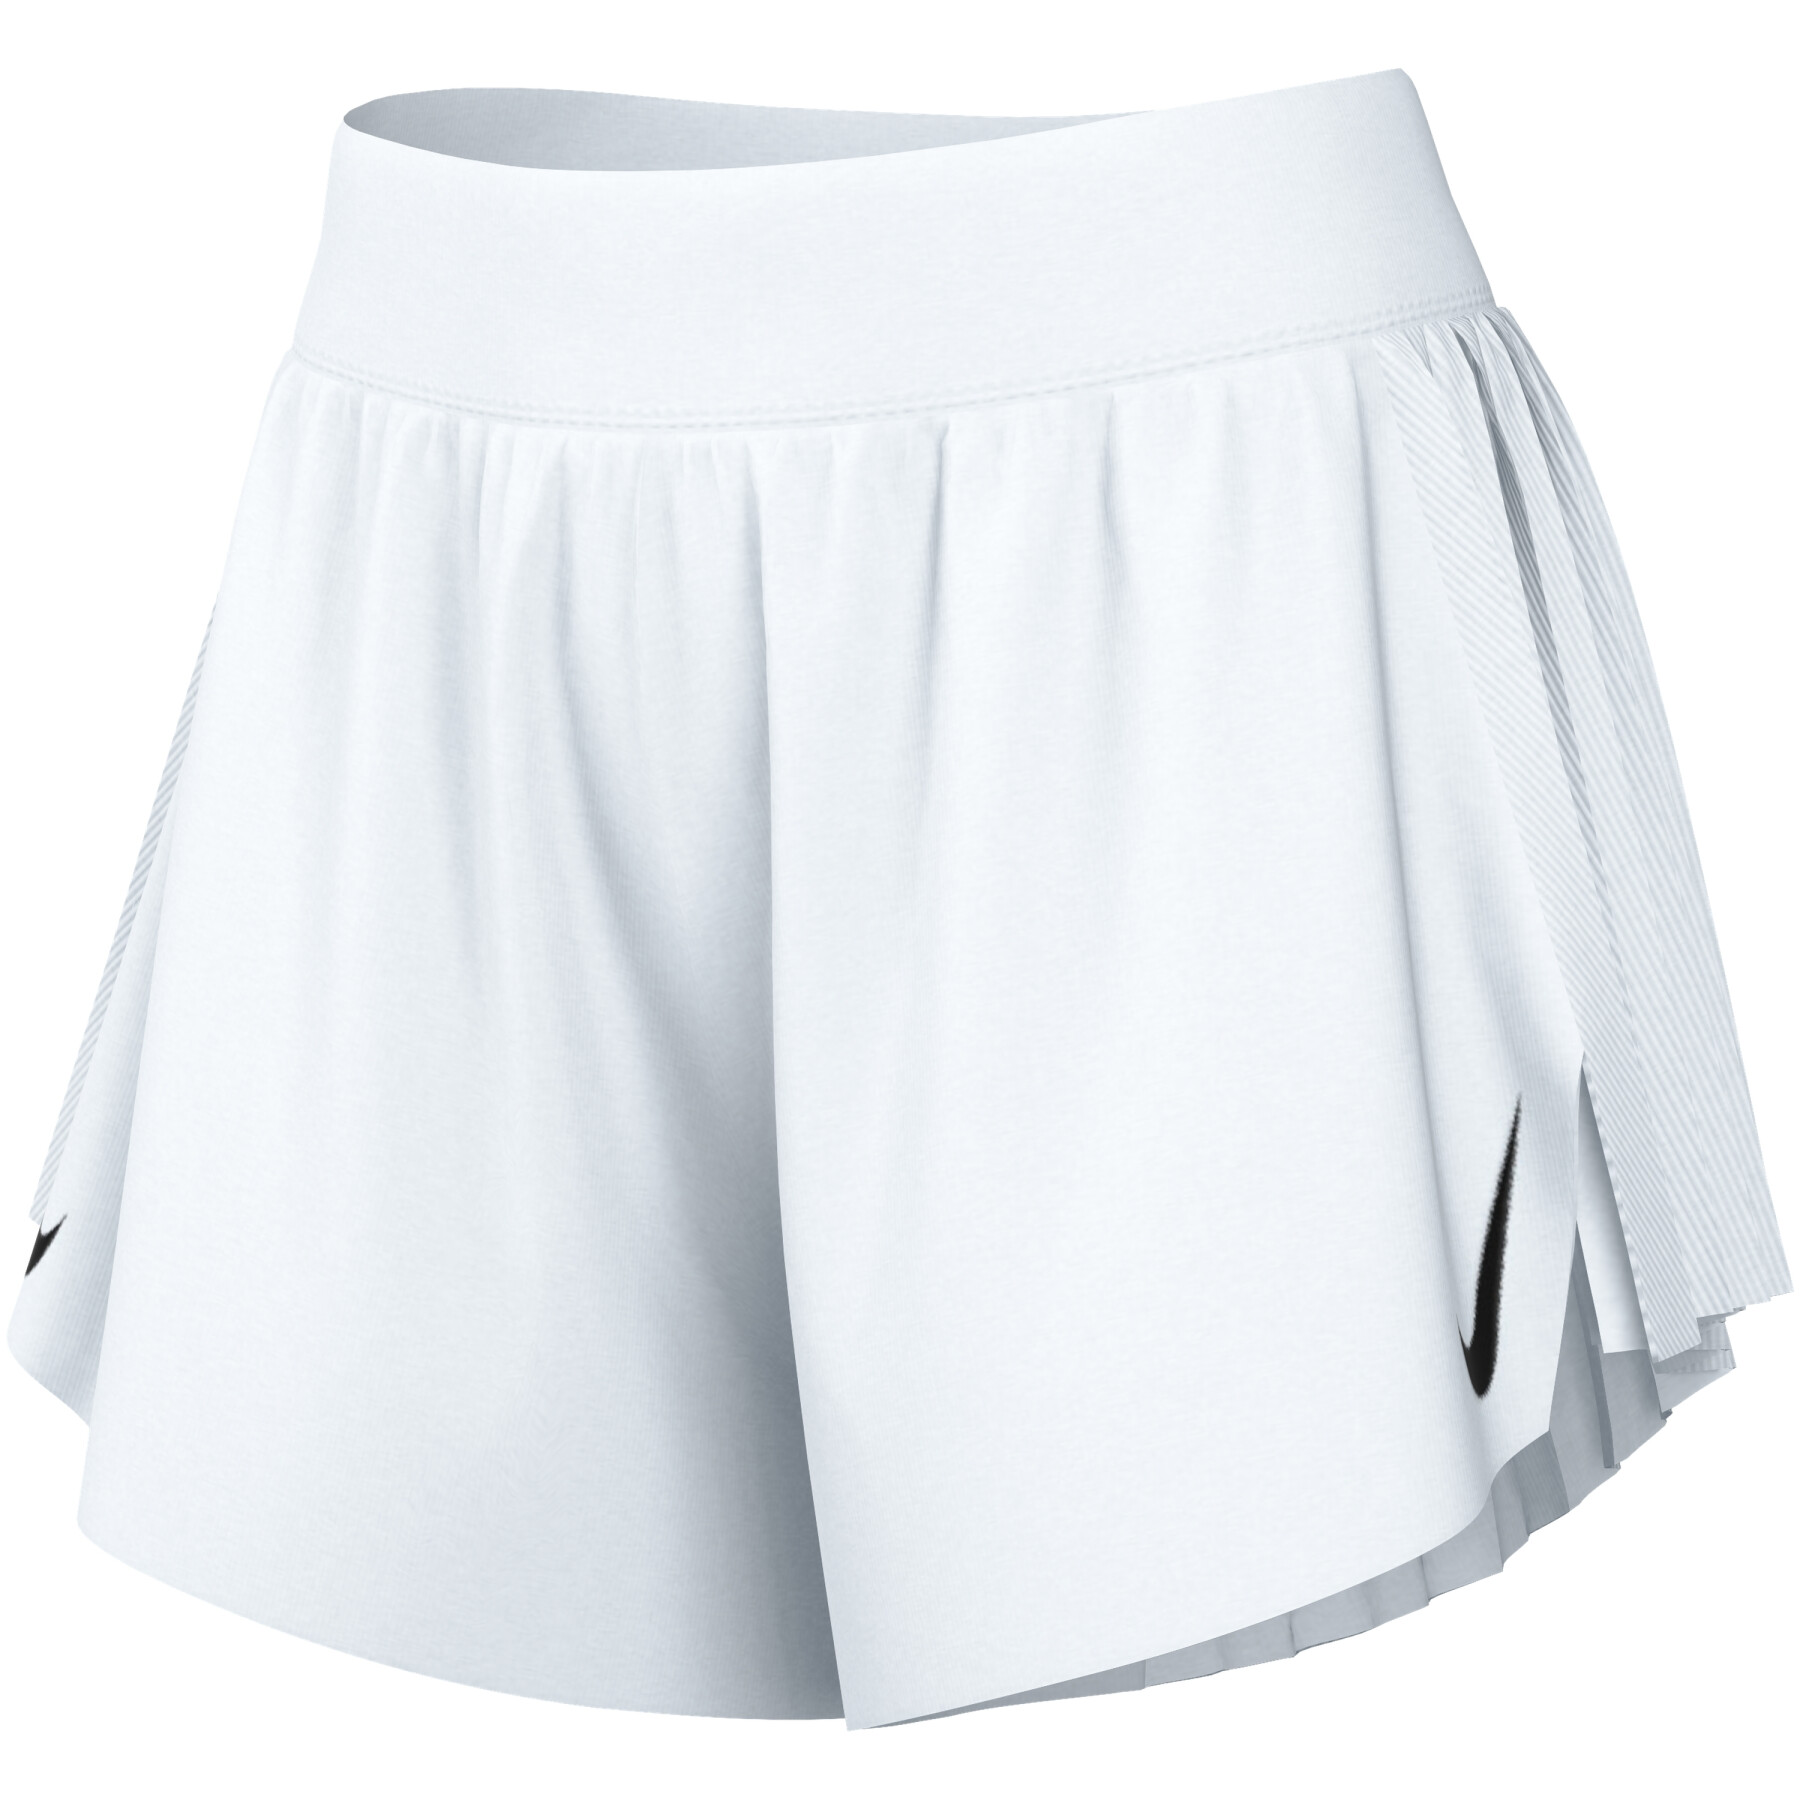 Women's mid-rise shorts with integrated undershort Nike AeroSwift Dri-FIT AD 8 cm